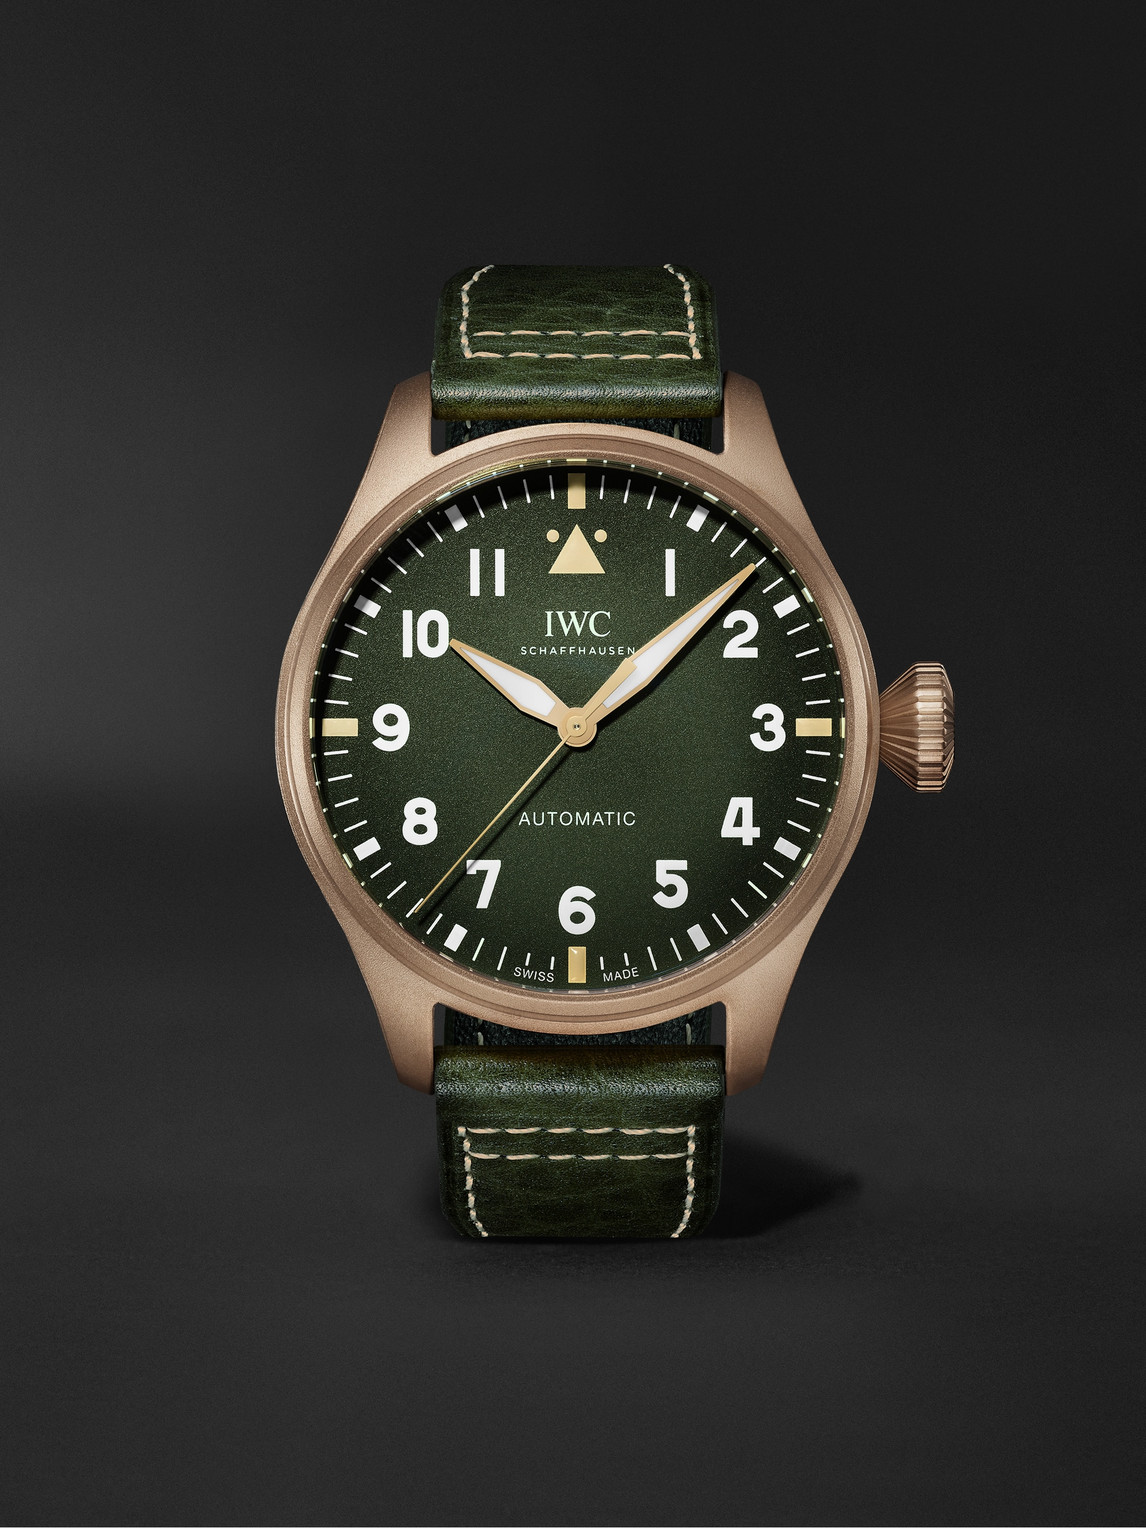 Iwc Schaffhausen Big Pilot's Spitfire Automatic 43mm Bronze And Leather Watch, Ref. No. Iw329702 In Green